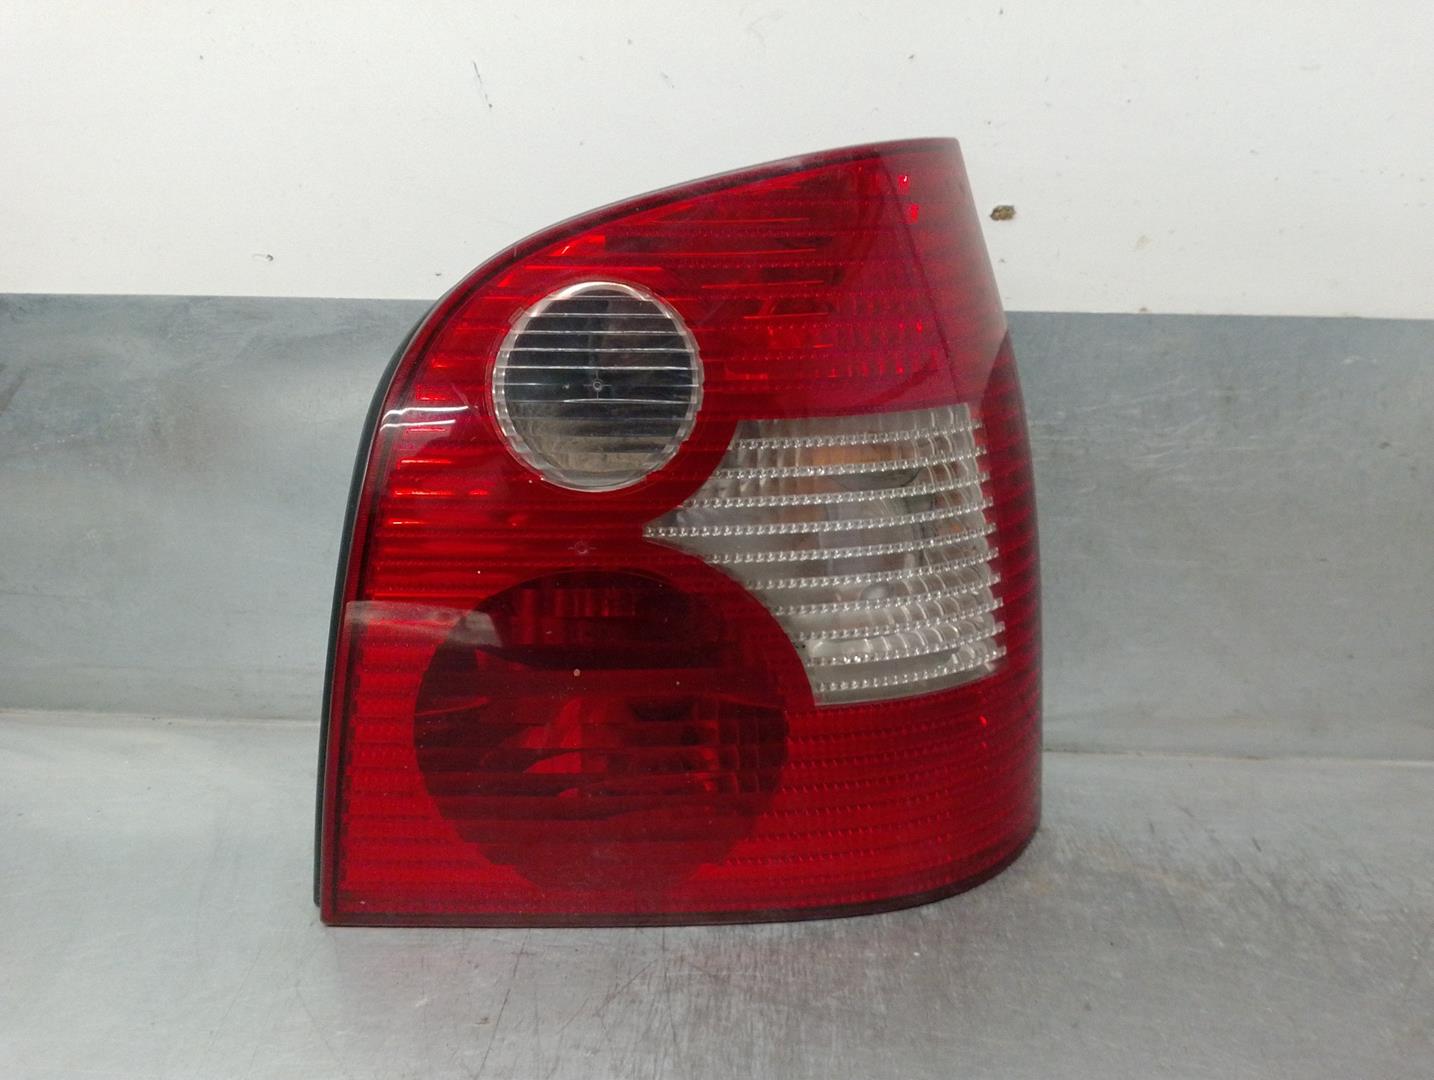 VOLKSWAGEN Polo 4 generation (2001-2009) Rear Right Taillight Lamp 6Q6945112A, 6Q6945258A, 3PUERTAS 19897301